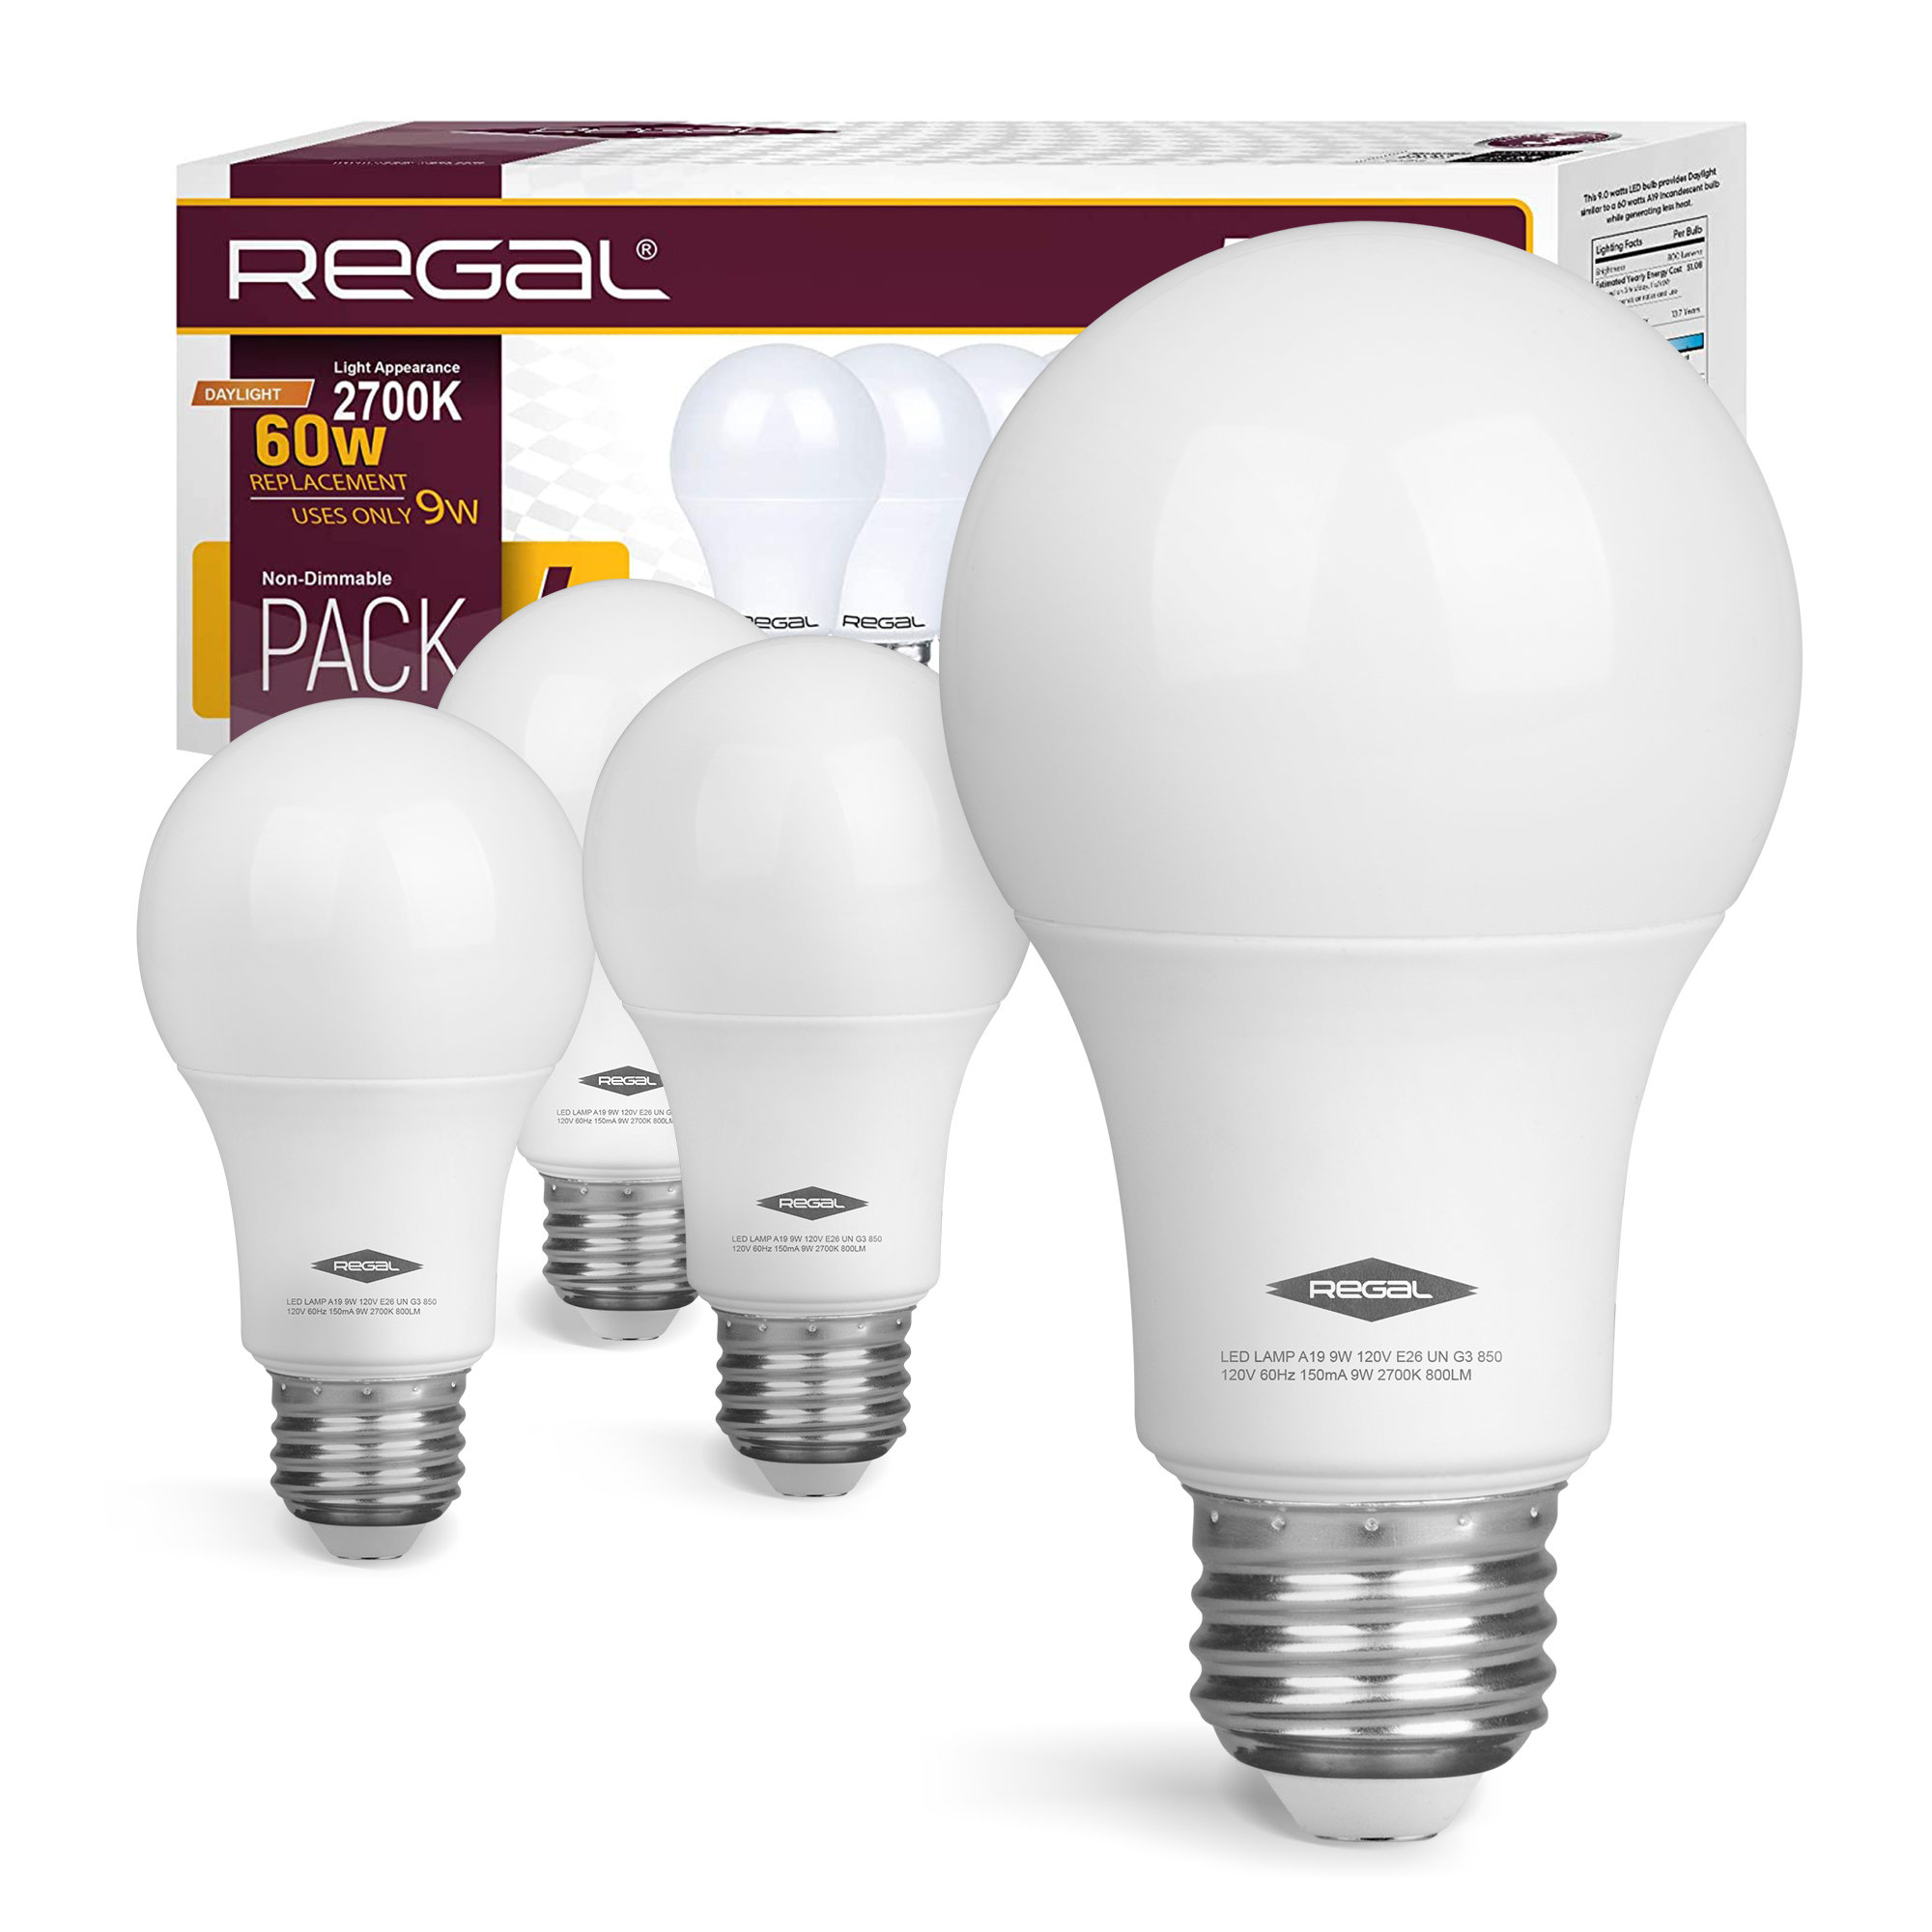 PACK OF 6 15000 Hours UL Listed Soft White E26 Base Equivalent to 60W 3000K 800 Lumens Non Dimmable 9W LED A19 Light Bulb 